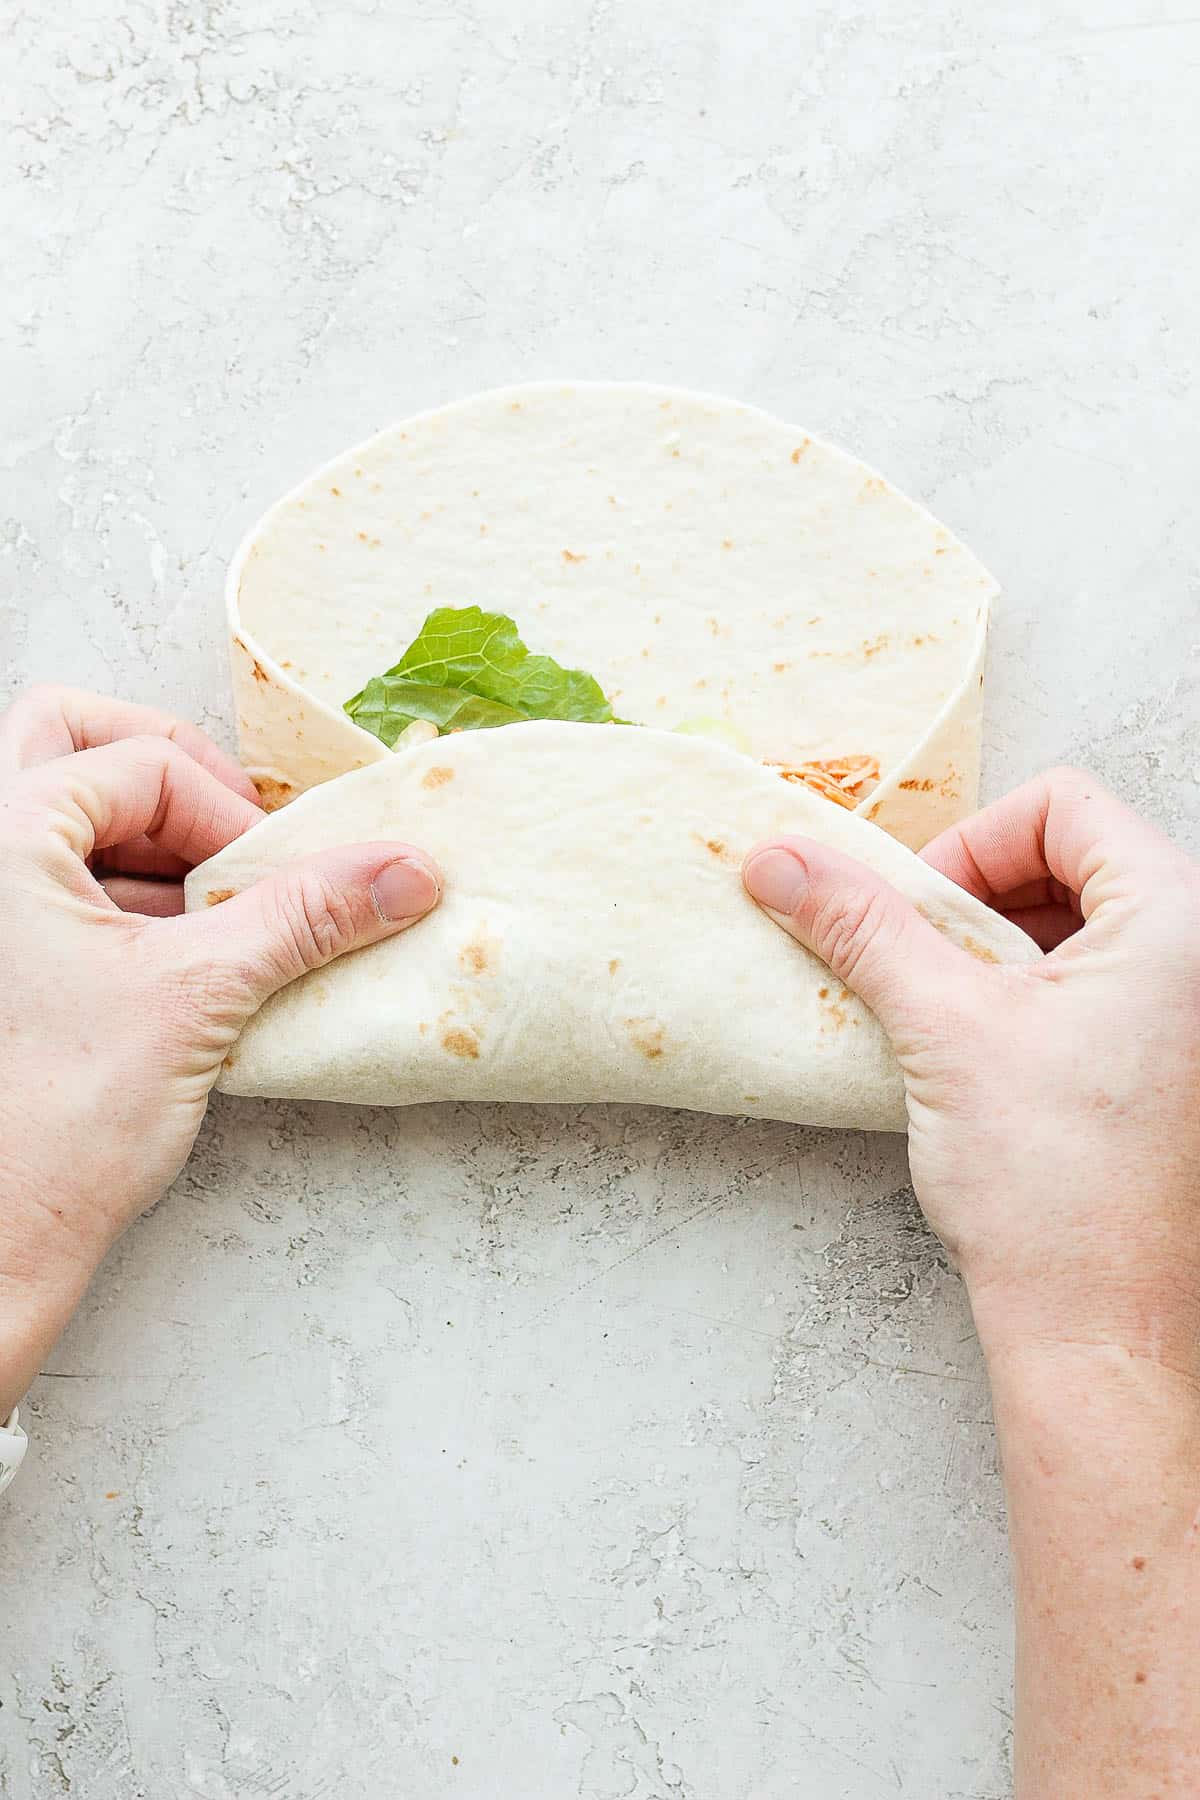 Two hands pulling up the bottom of the tortilla.